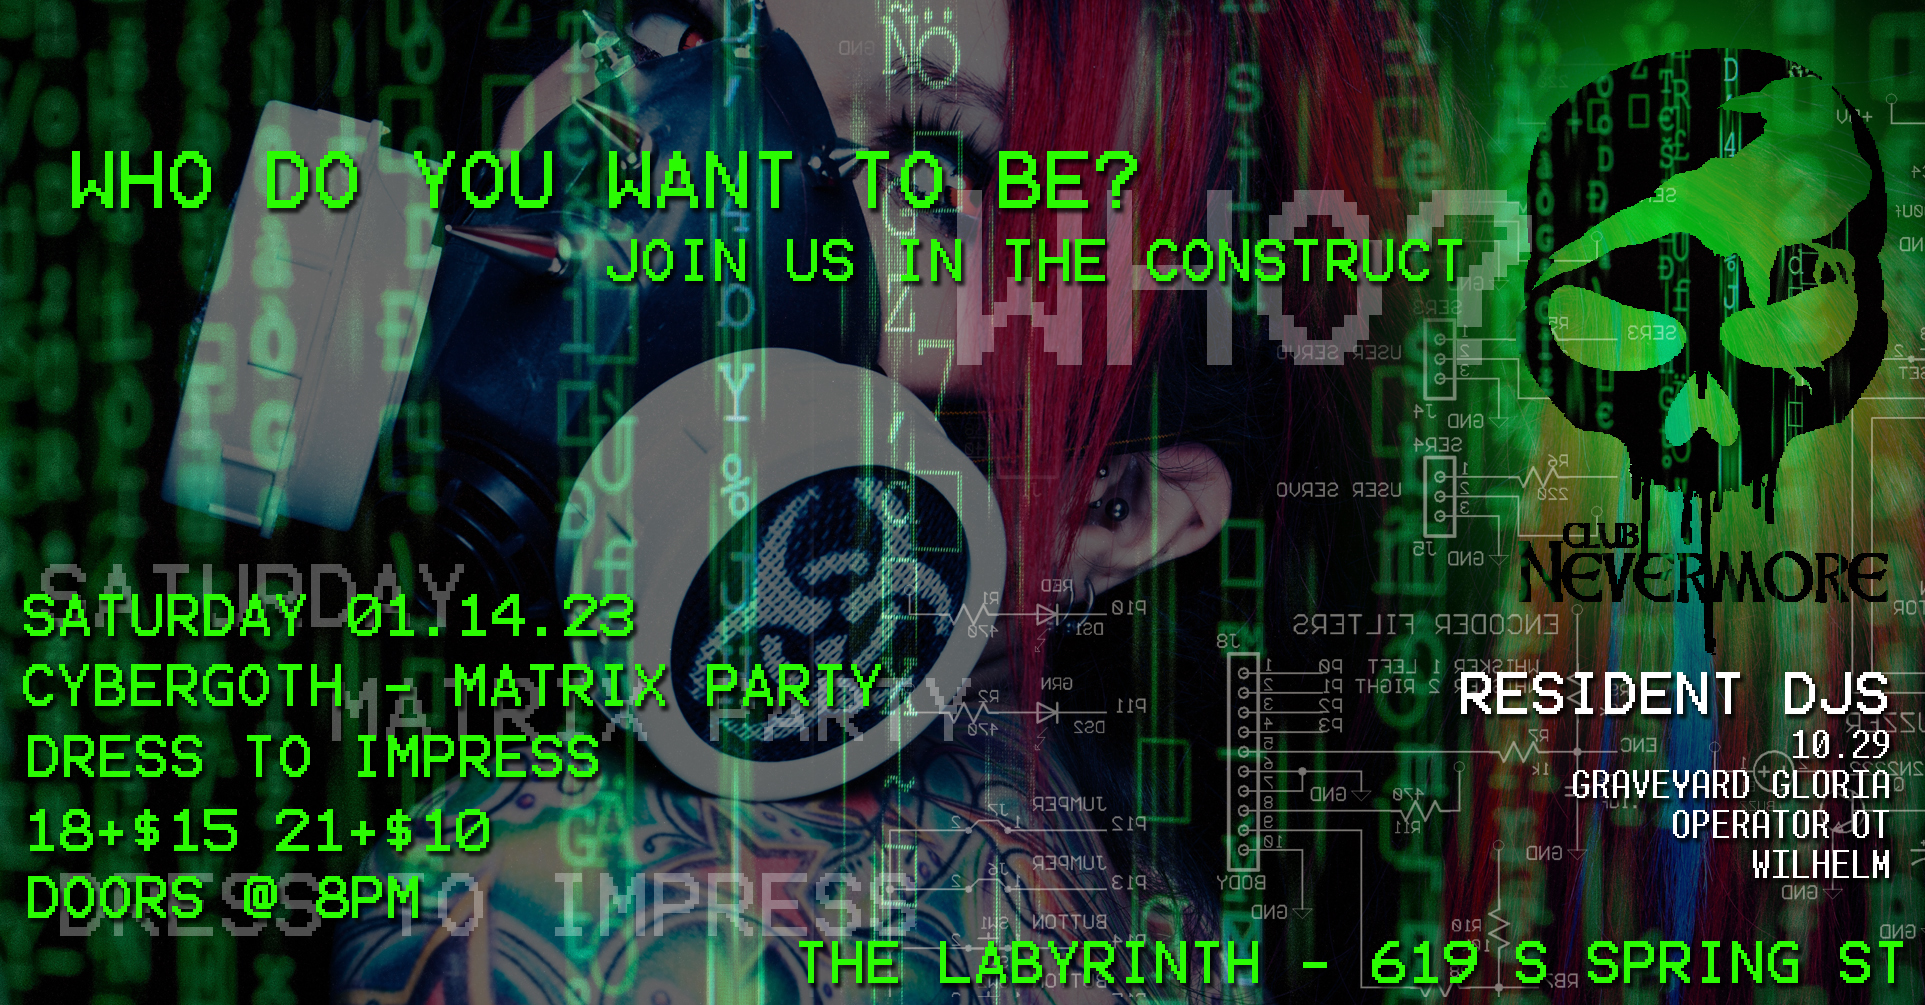 Flyer for Club Nevermore&rsquo;s Cybergoth - Matrix Party. It has a background of green numbers on black, like what was seen in the movie The Matrix. The text says, &ldquo;Who do you want to be? Join us in the construct! Saturday, January 14, 2023. Cybergoth - Matrix party. With resident DJs DJ 10.29, DJ Graveyard Gloria, DJ Operator OT, and DJ Wilhelm. Dress to impress. Doors at 8 PM. Admission is $15 for ages 18+; $10 for ages 21+. At The Labyrinth, 619 South Spring Street, Little Rock, Arkansas